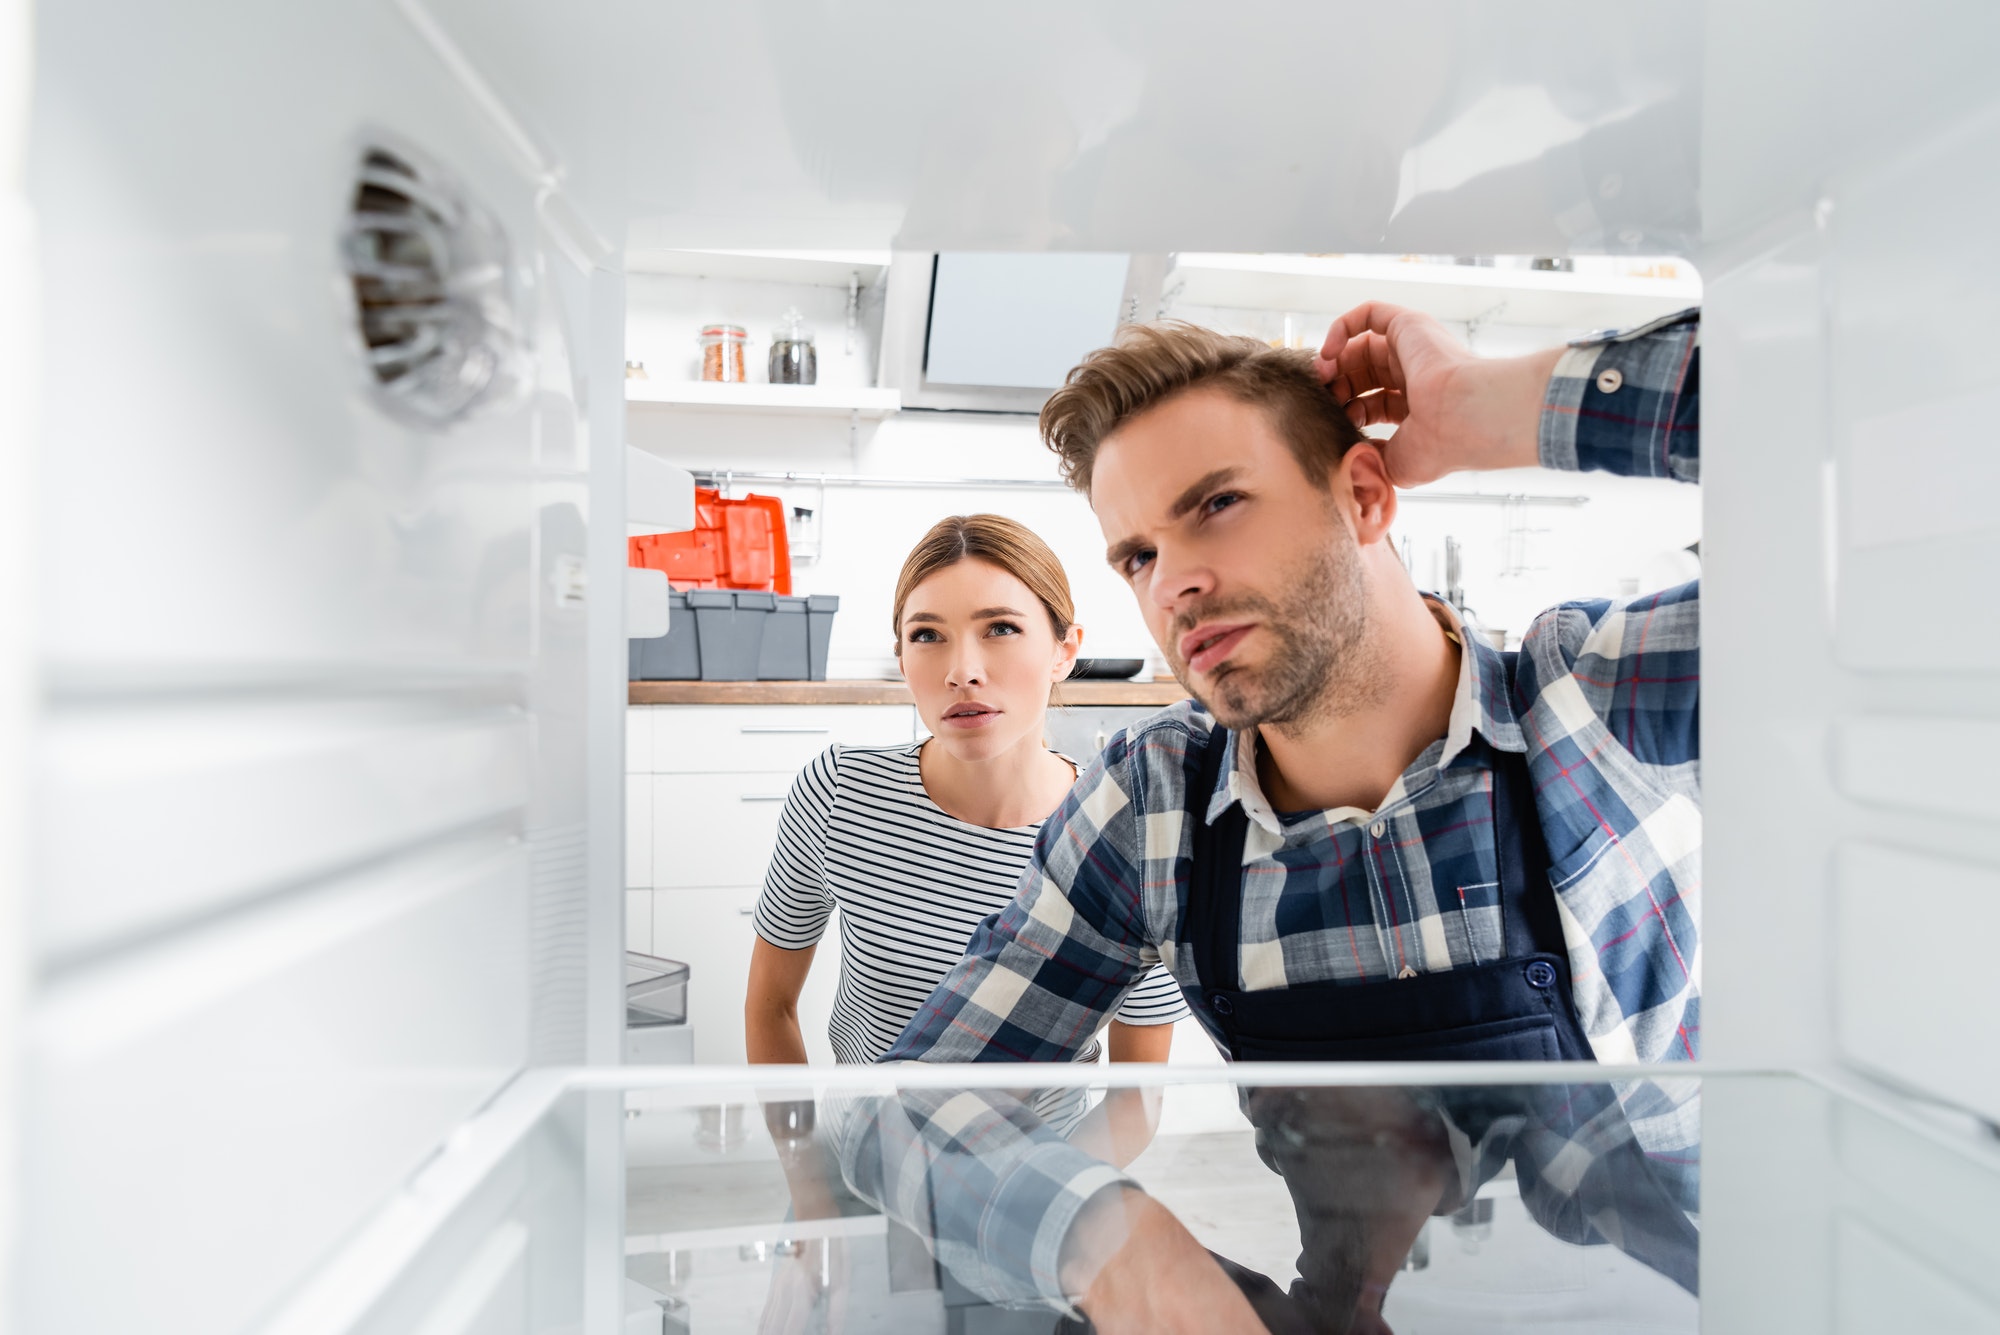 thoughtful handyman and young woman looking at freezer on blurred foreground in kitchen